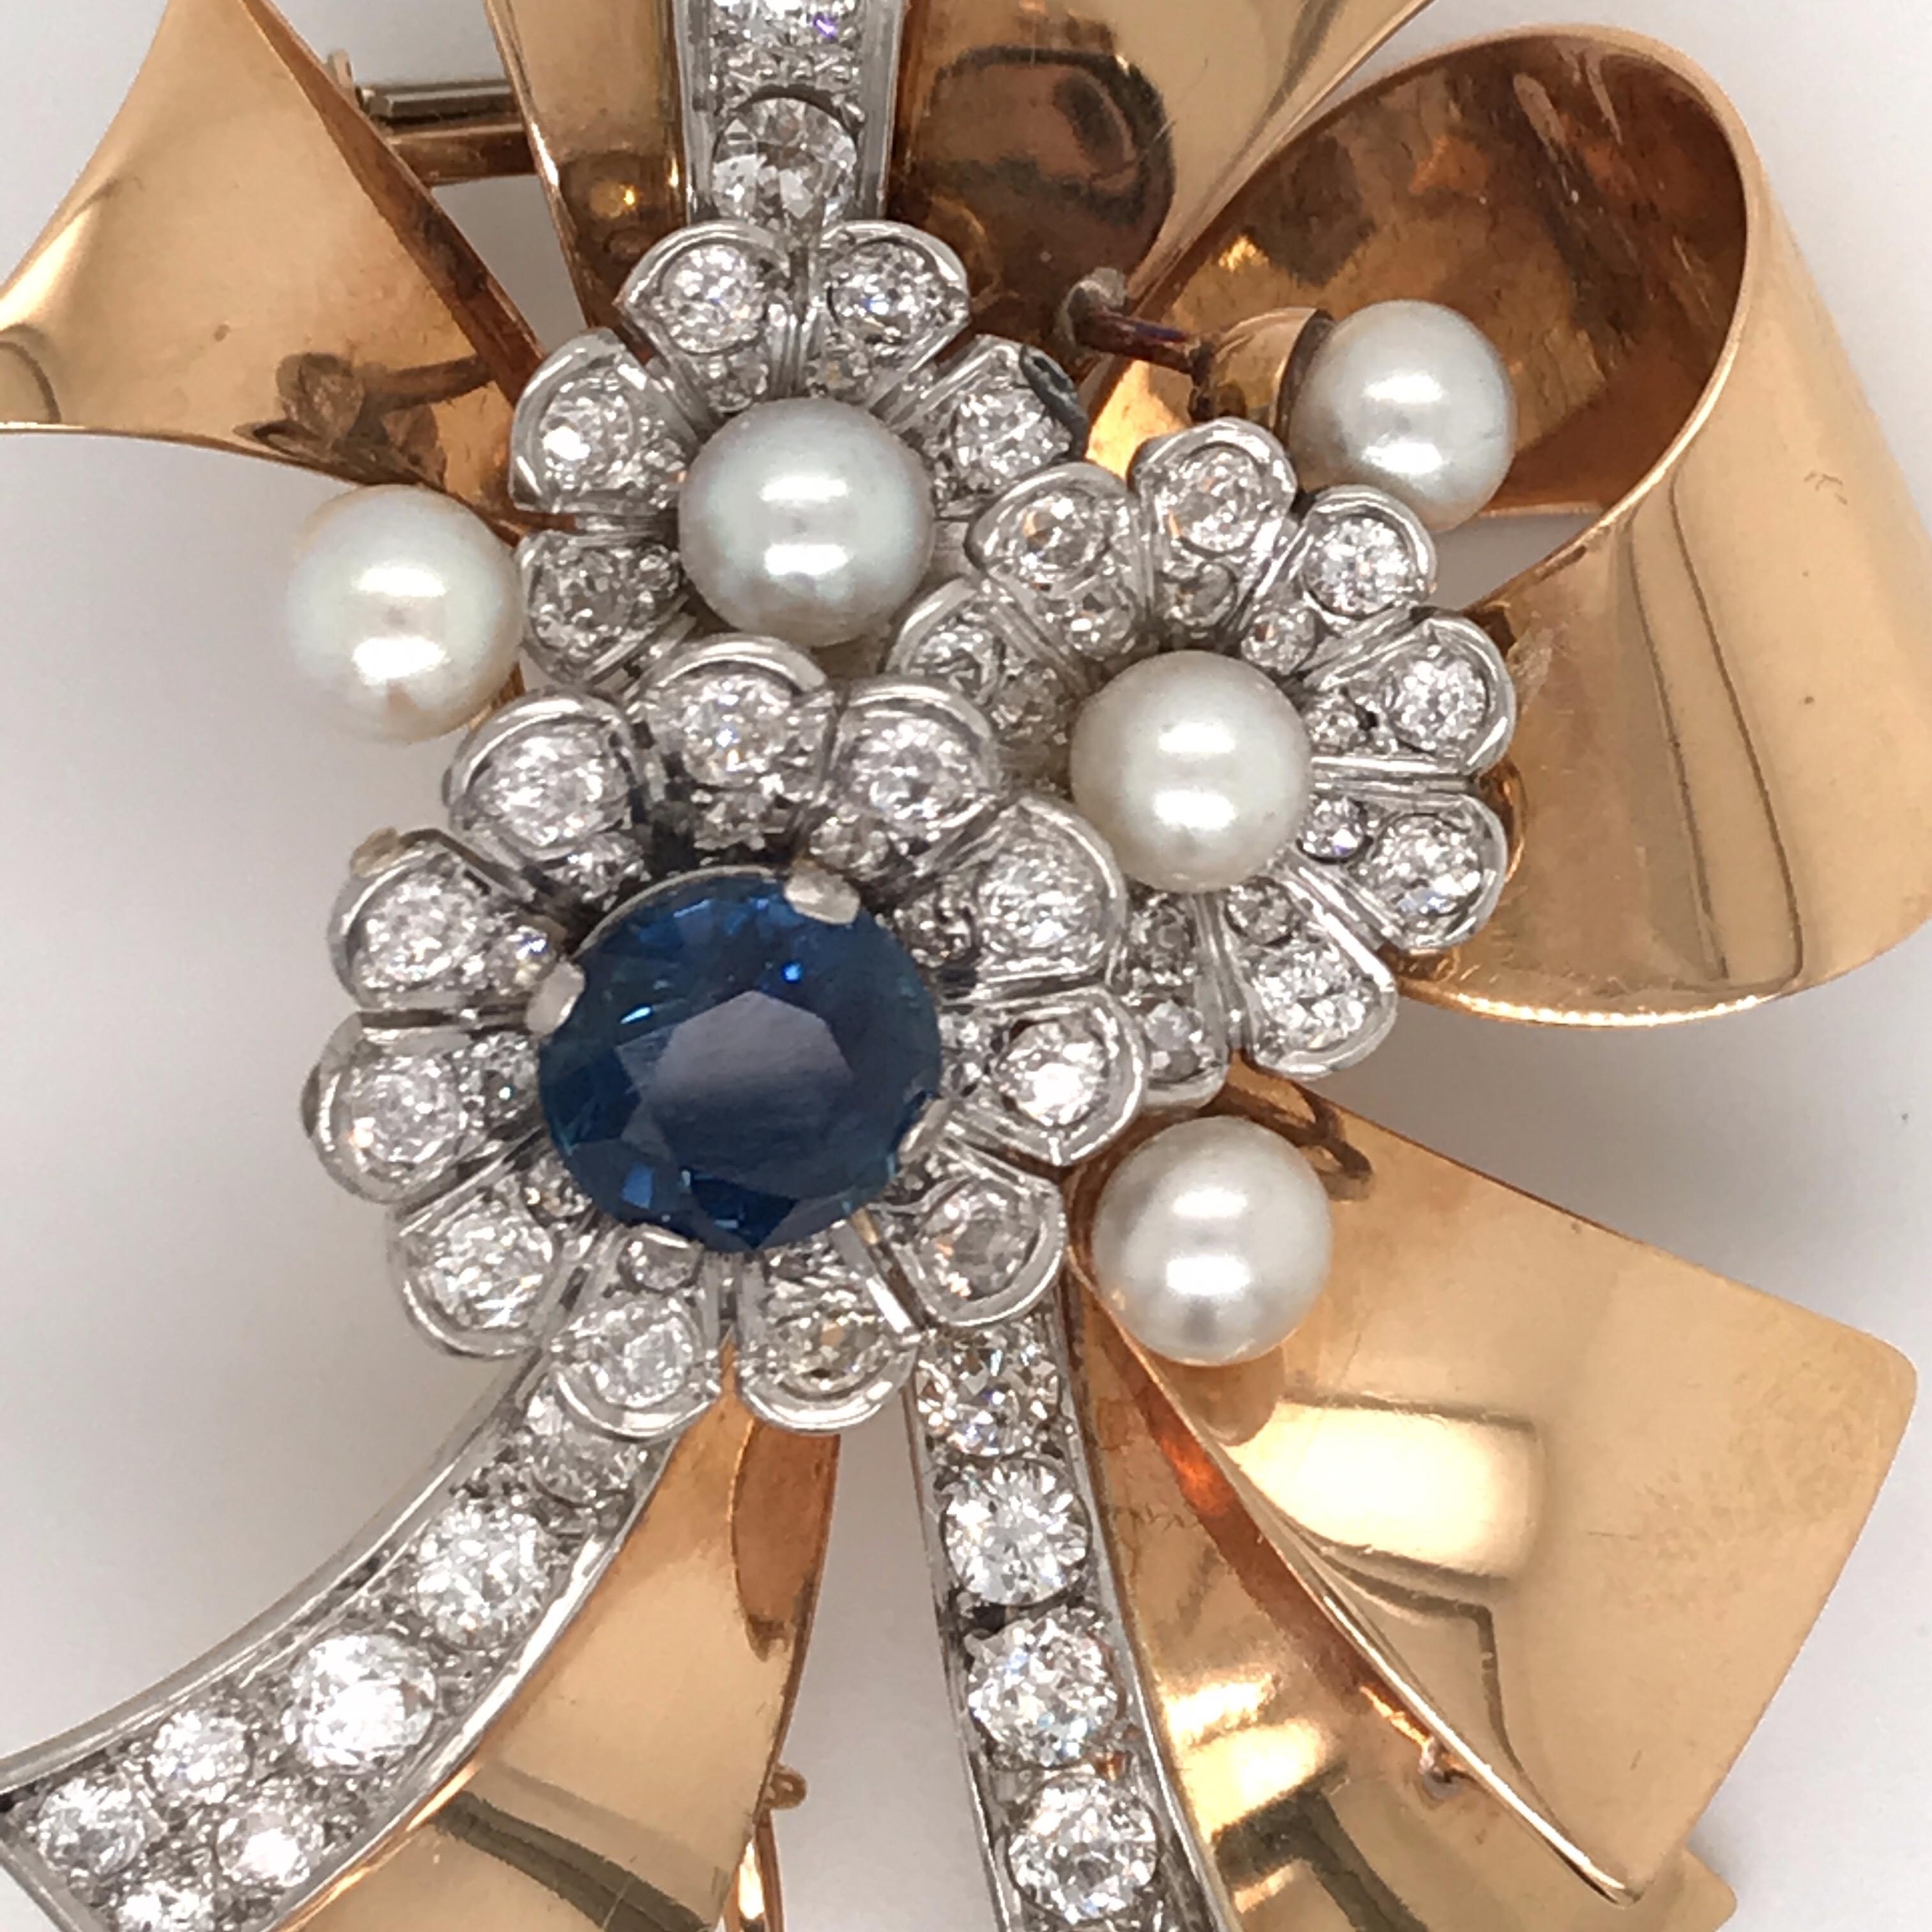 Retro 1950's floral brooch featuring one blue round Sapphire weighing approximately 3.50 carats flanked with numerous round brilliants weighing approximately 5.50 carats with 5 cultural pearls measuring 5.5 mm, 18k yellow gold.